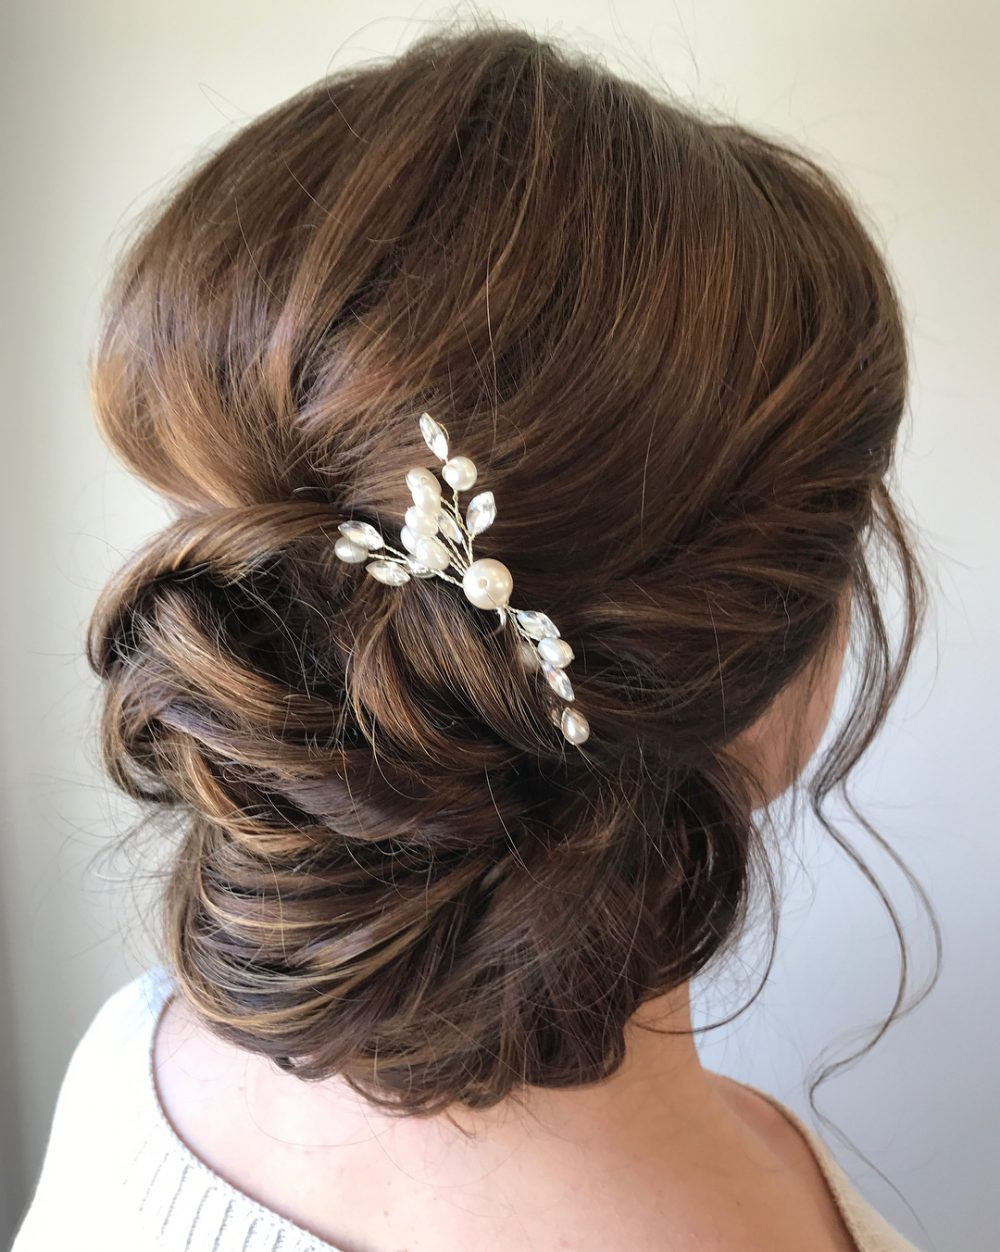 Easy Updo Hairstyles
 33 Breathtaking Loose Updos That Are Trendy for 2018